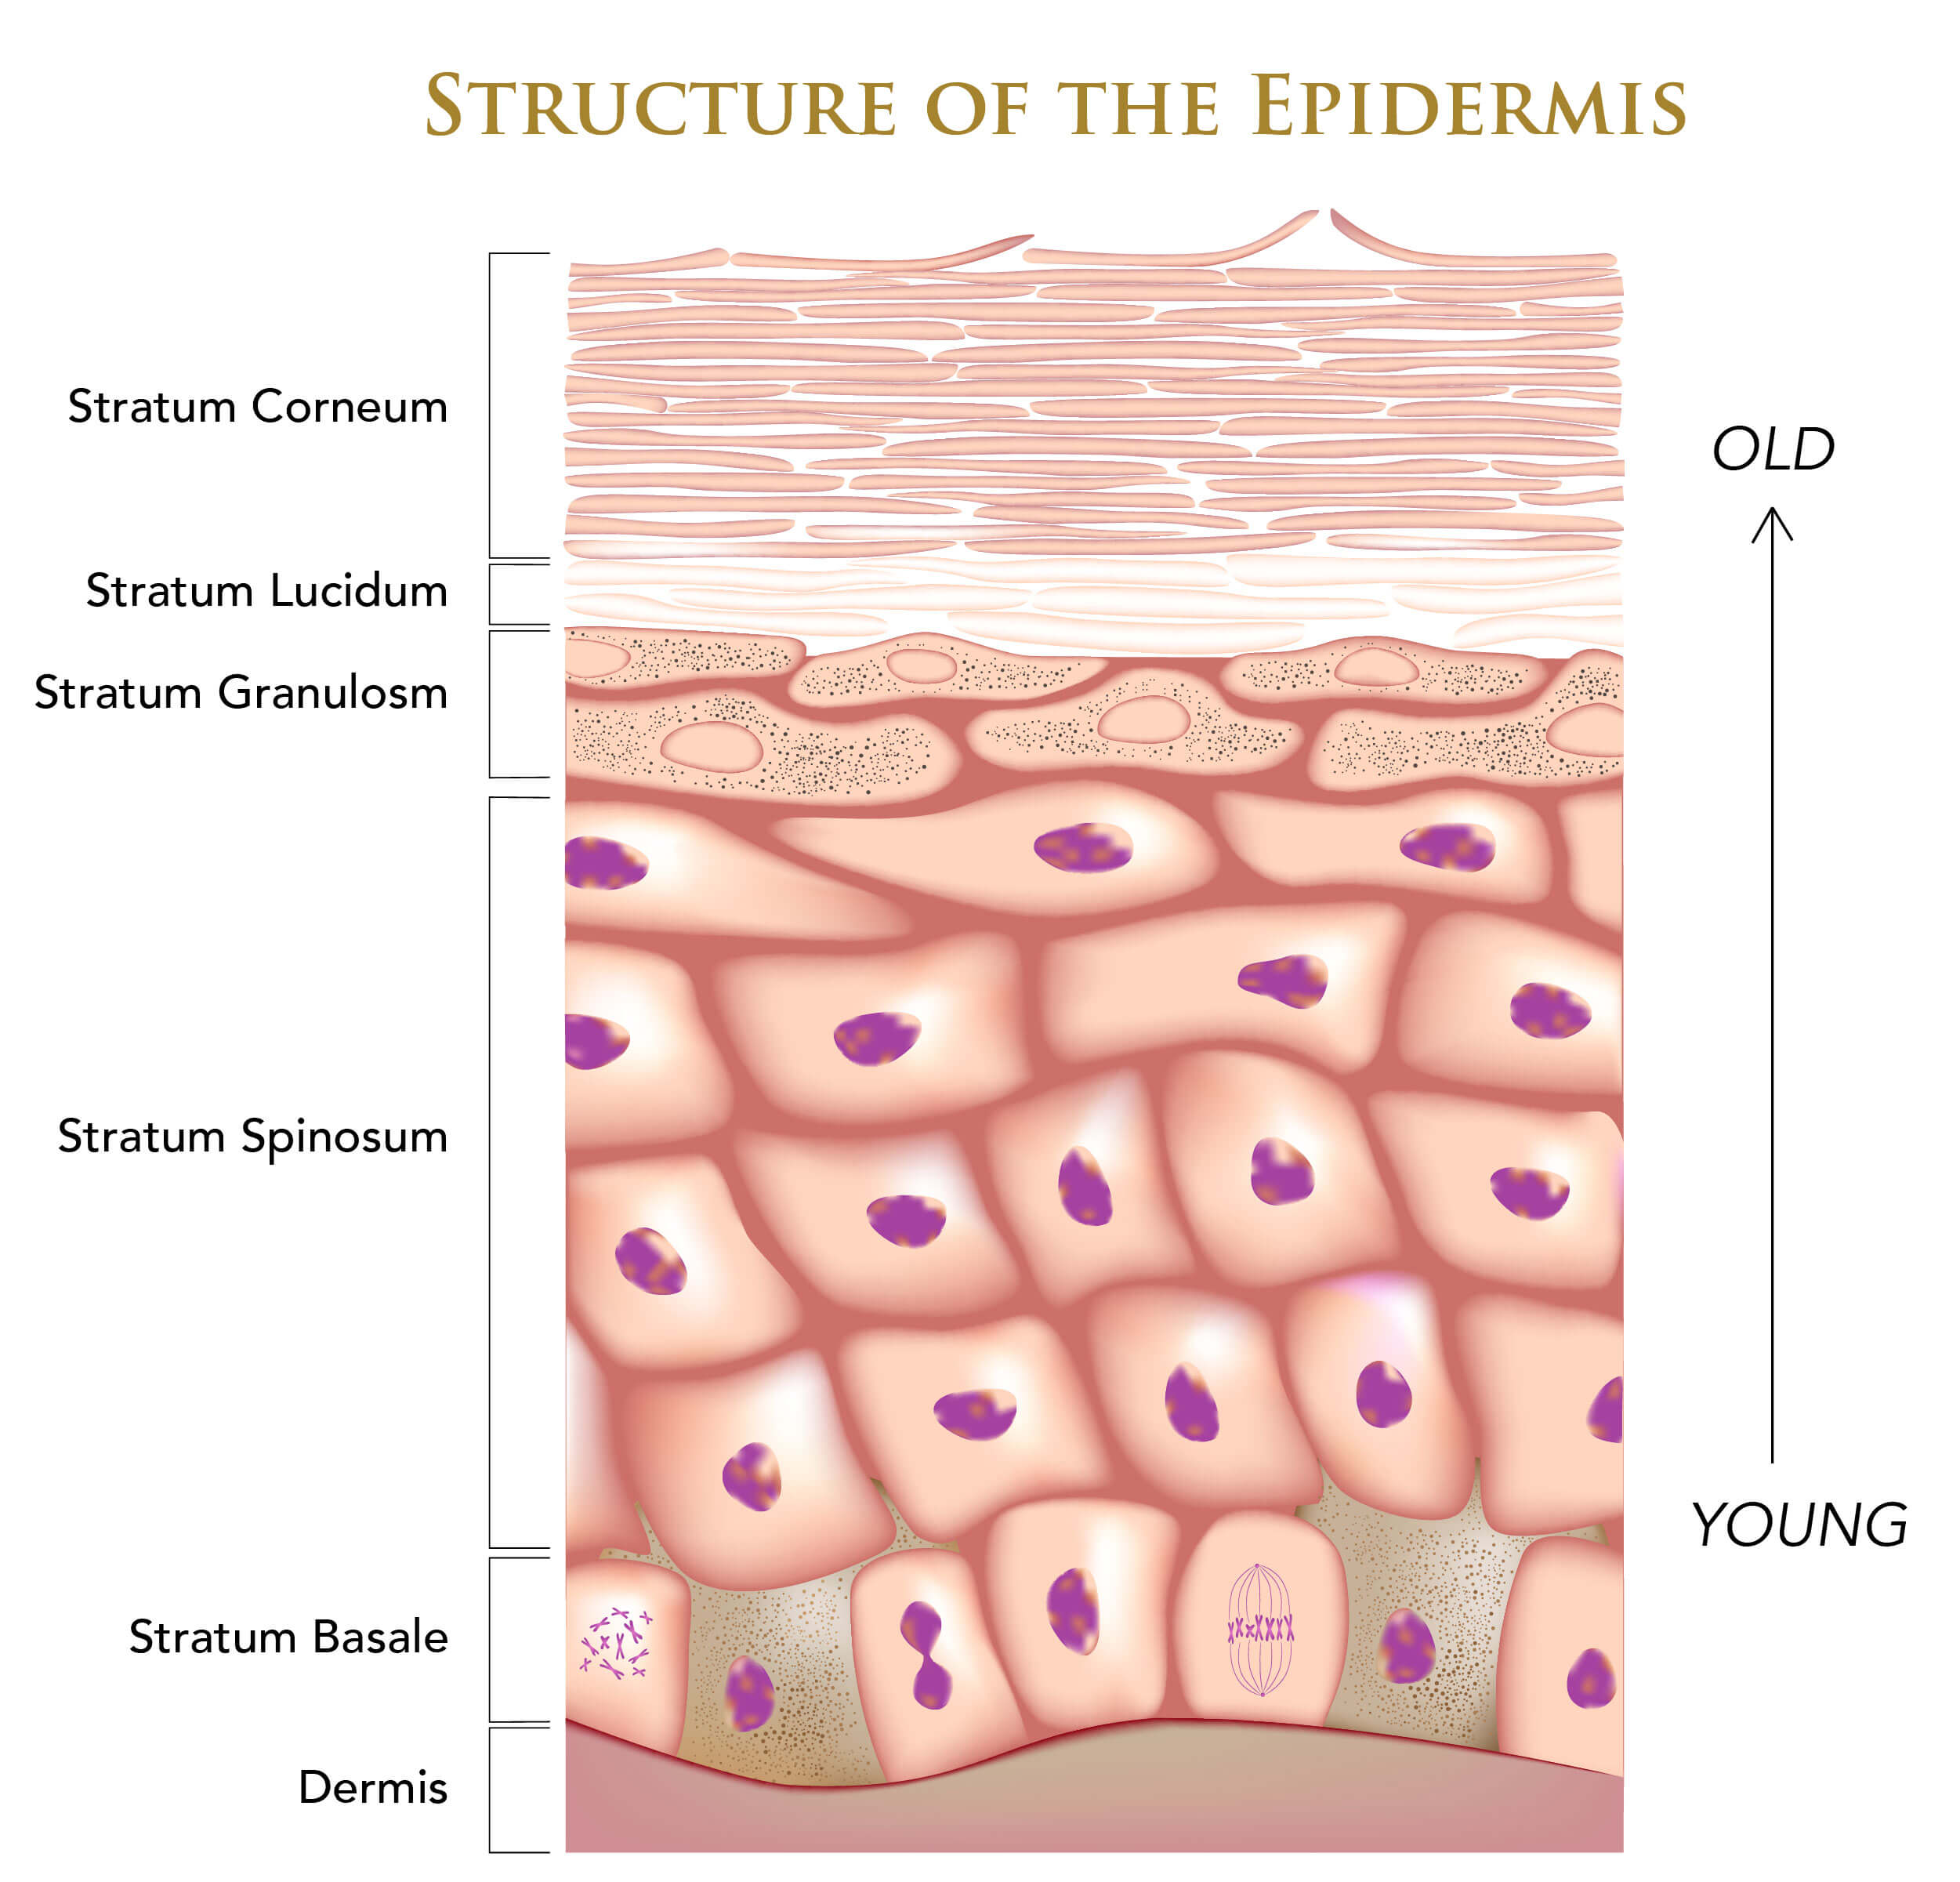 Illustration of the structure of the epidermis